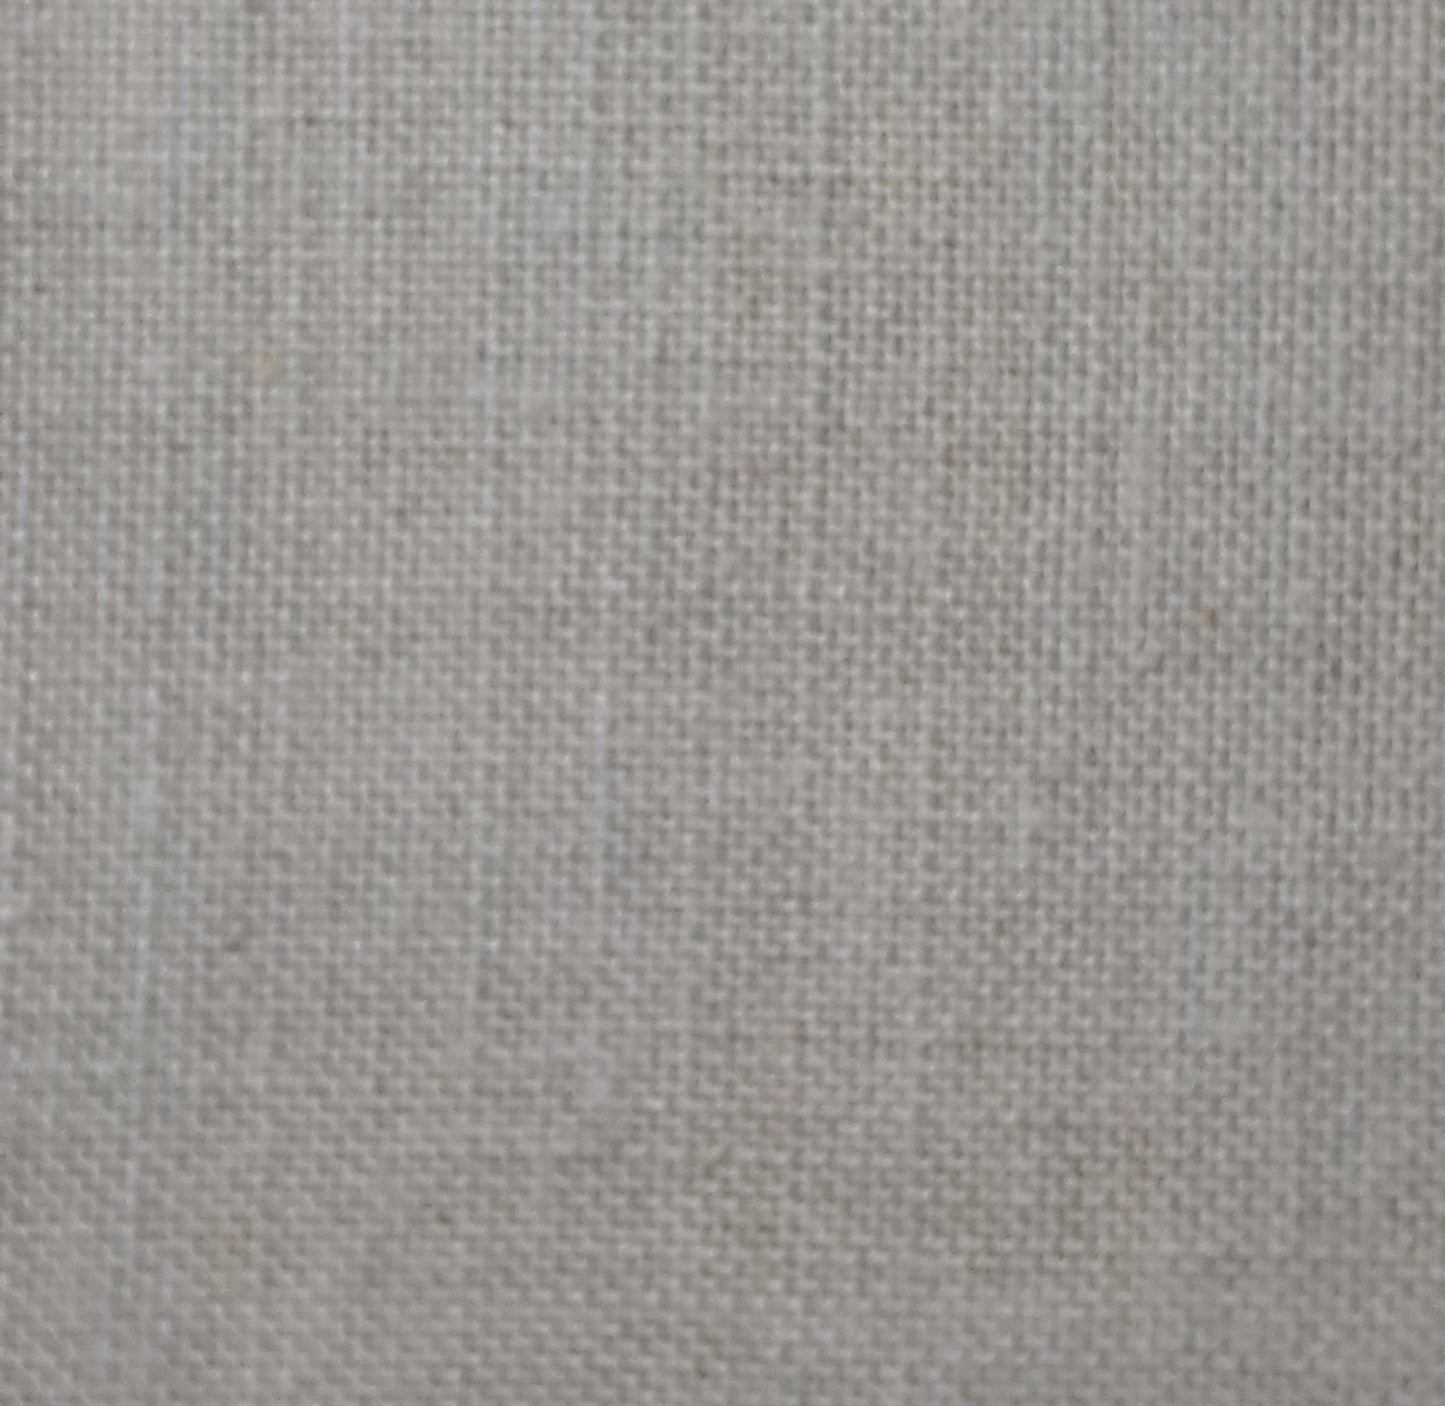 Embroidery Linen - Natural - $0.027/sq in